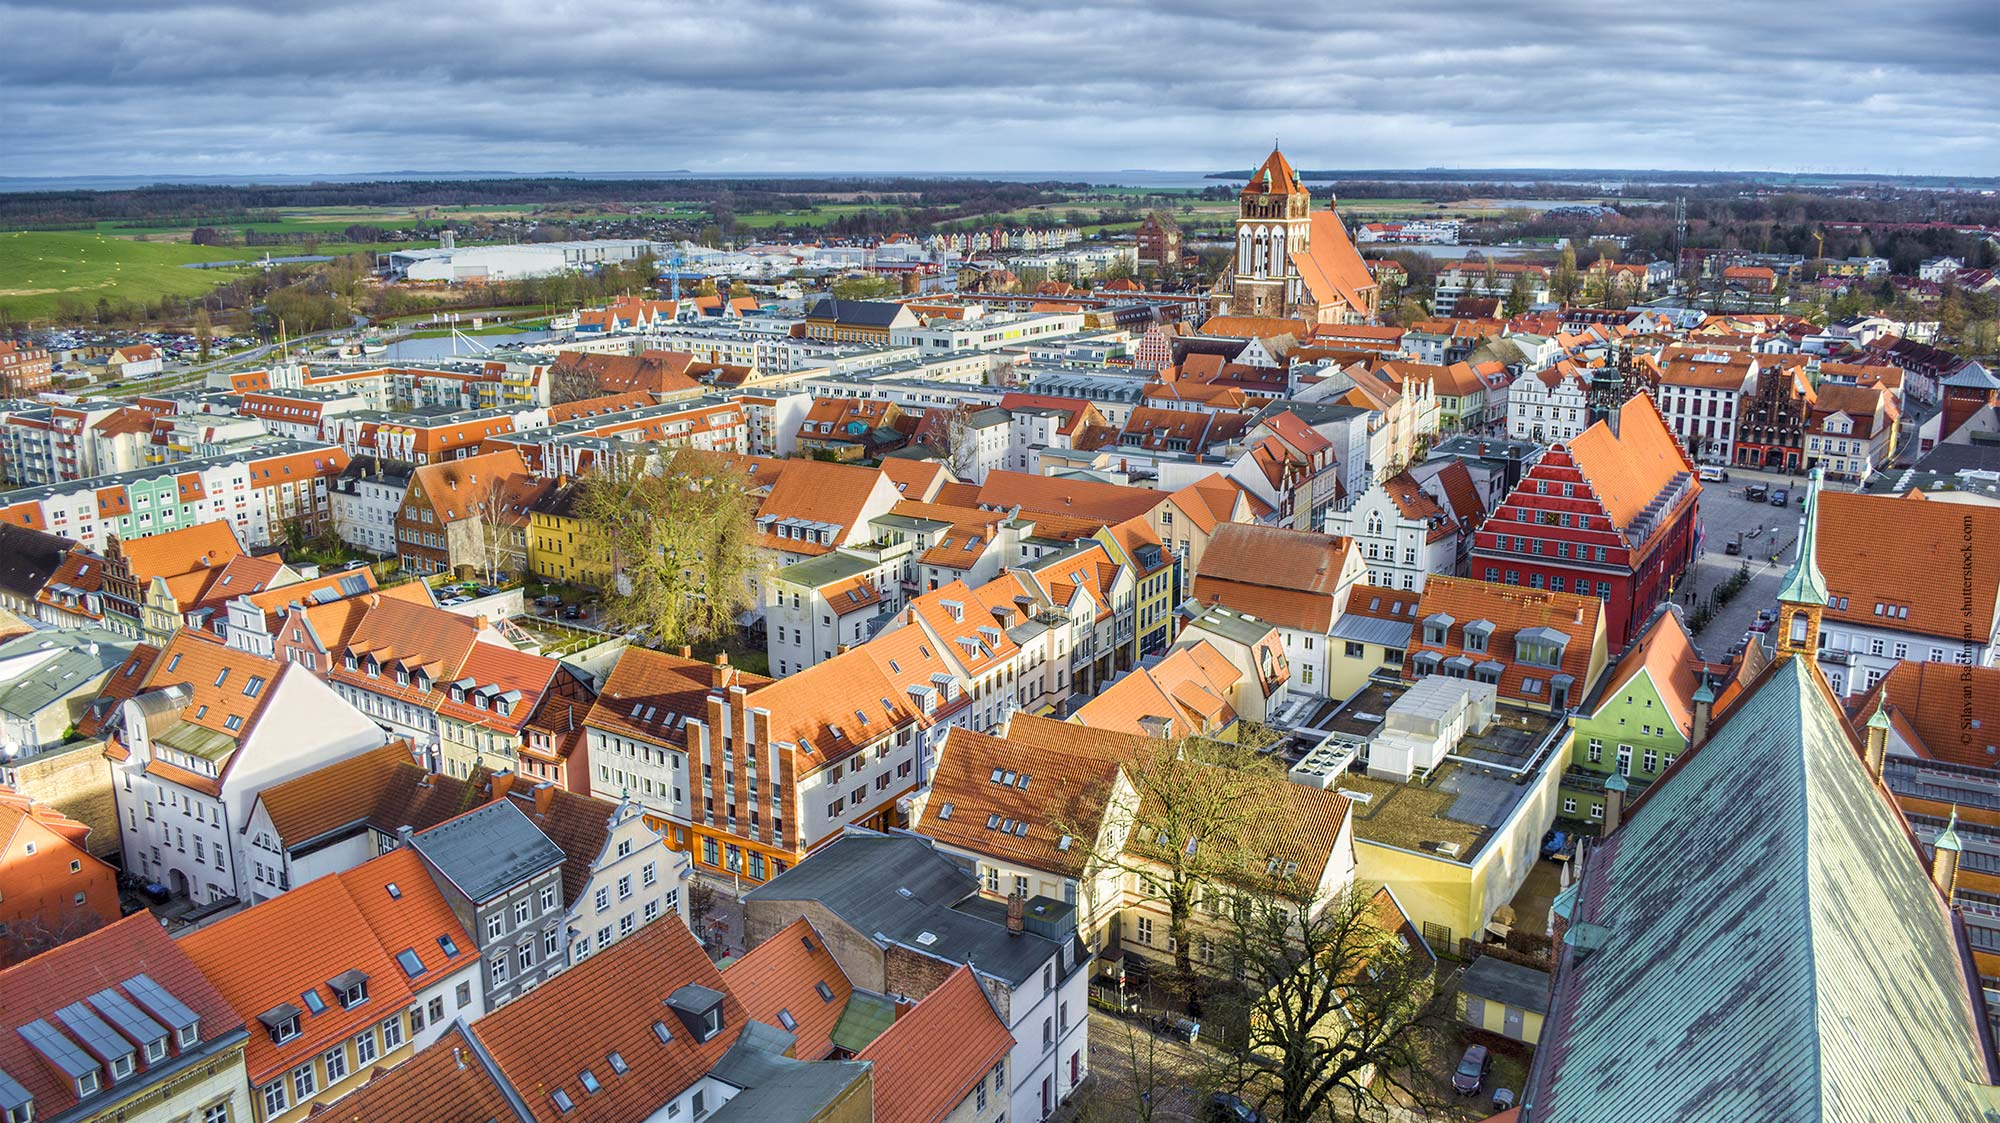 View over the town of Greifswald